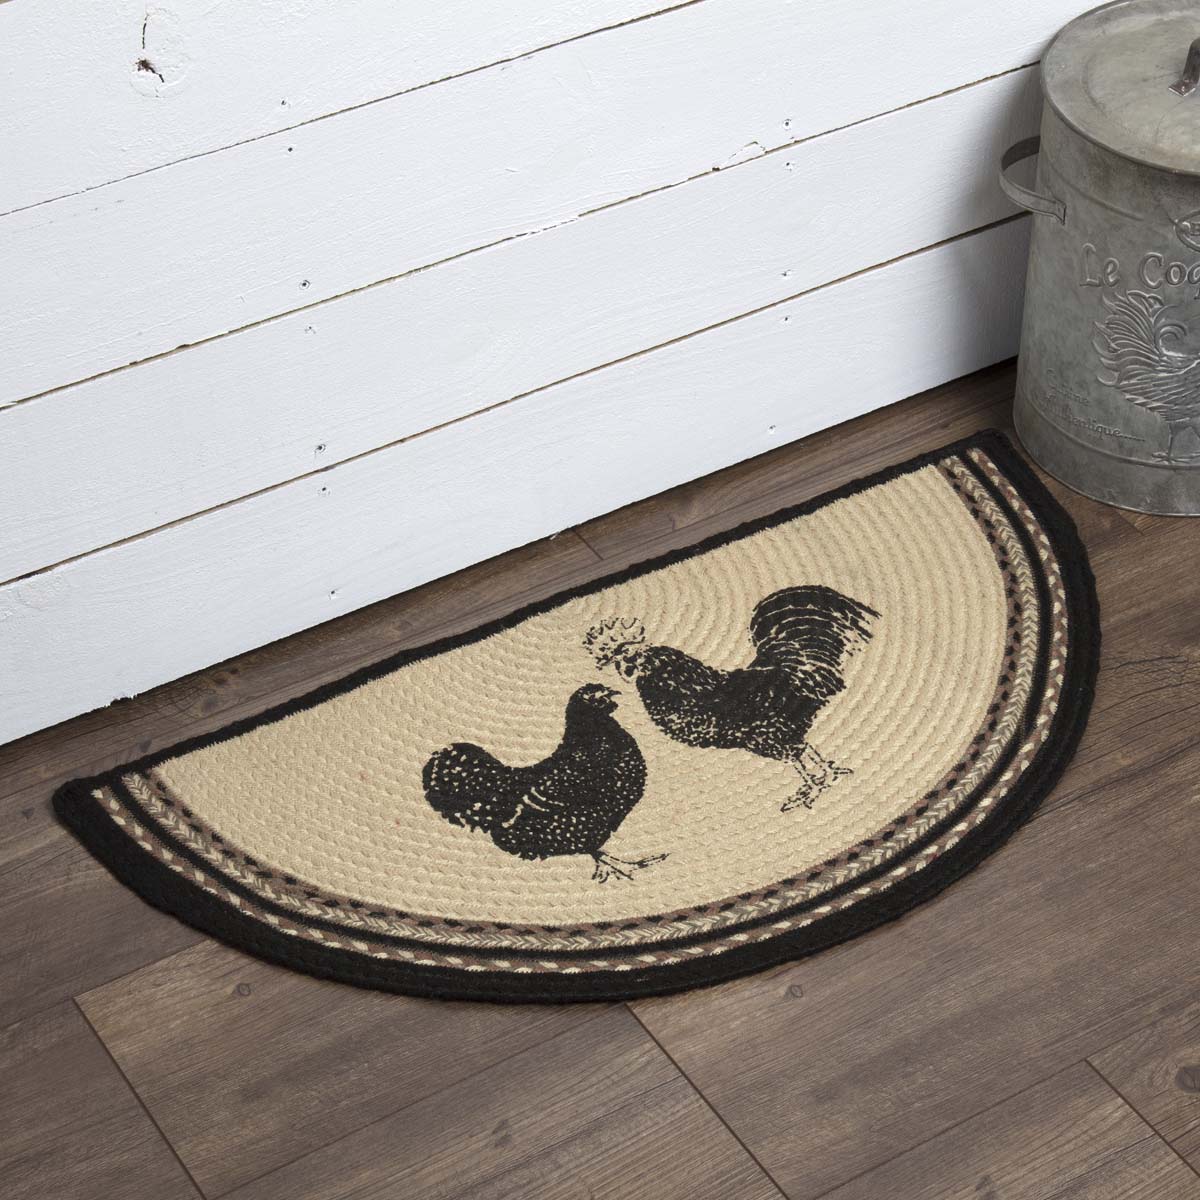 69392-Sawyer-Mill-Charcoal-Poultry-Jute-Rug-Half-Circle-w-Pad-16.5x33-image-2